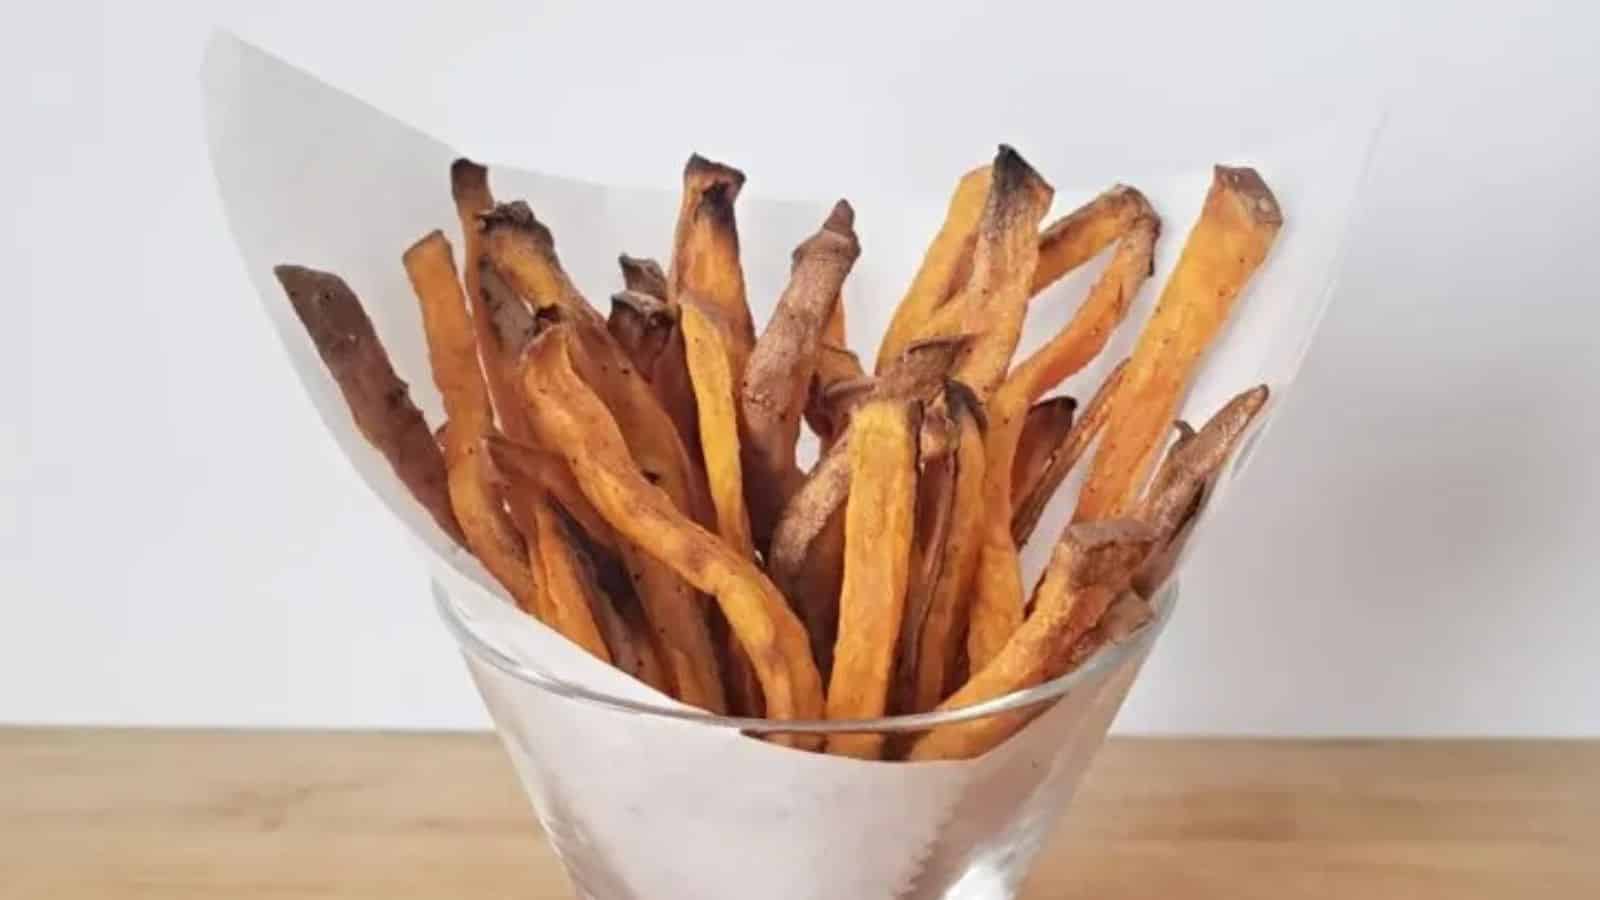 Image shows a glass filled with Sweet Potato Fries.